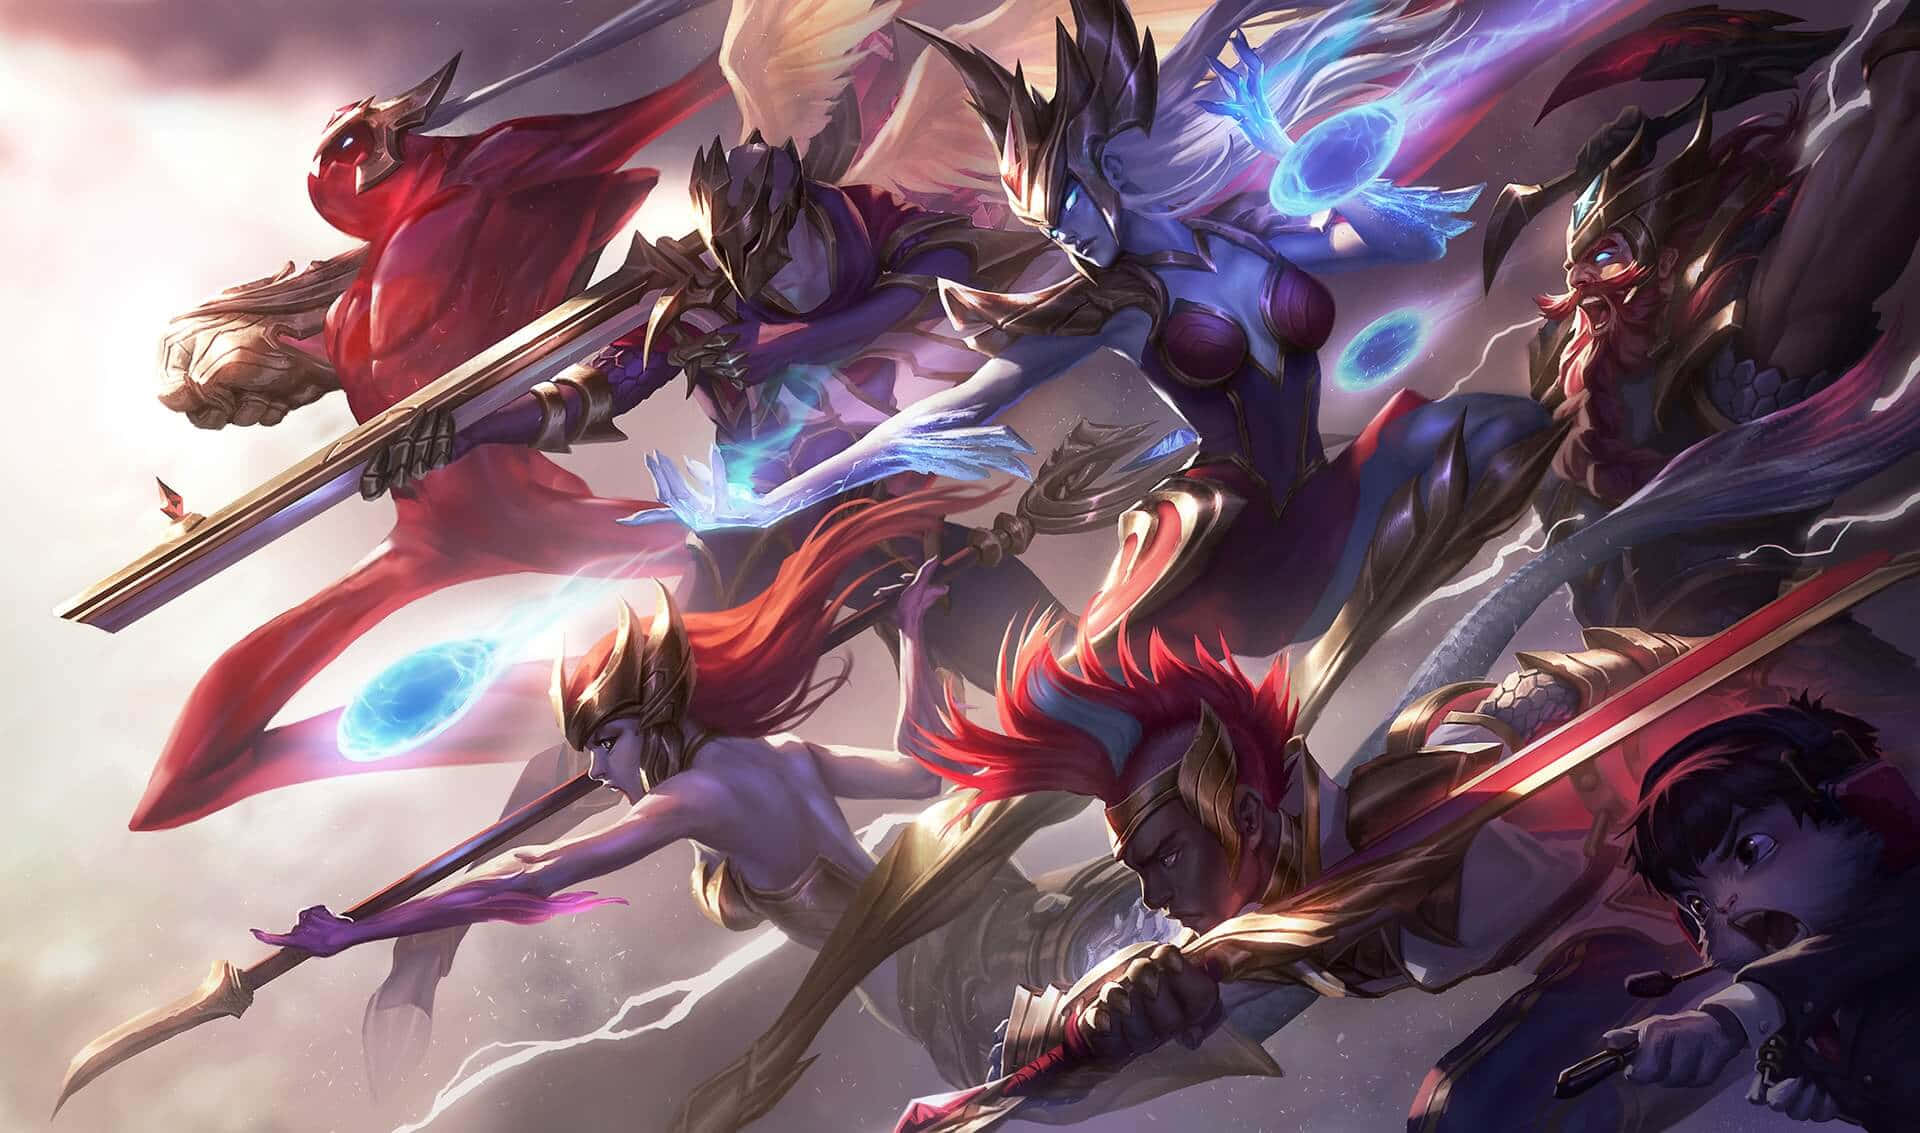 Battle your way to victory with League of Legends Wallpaper